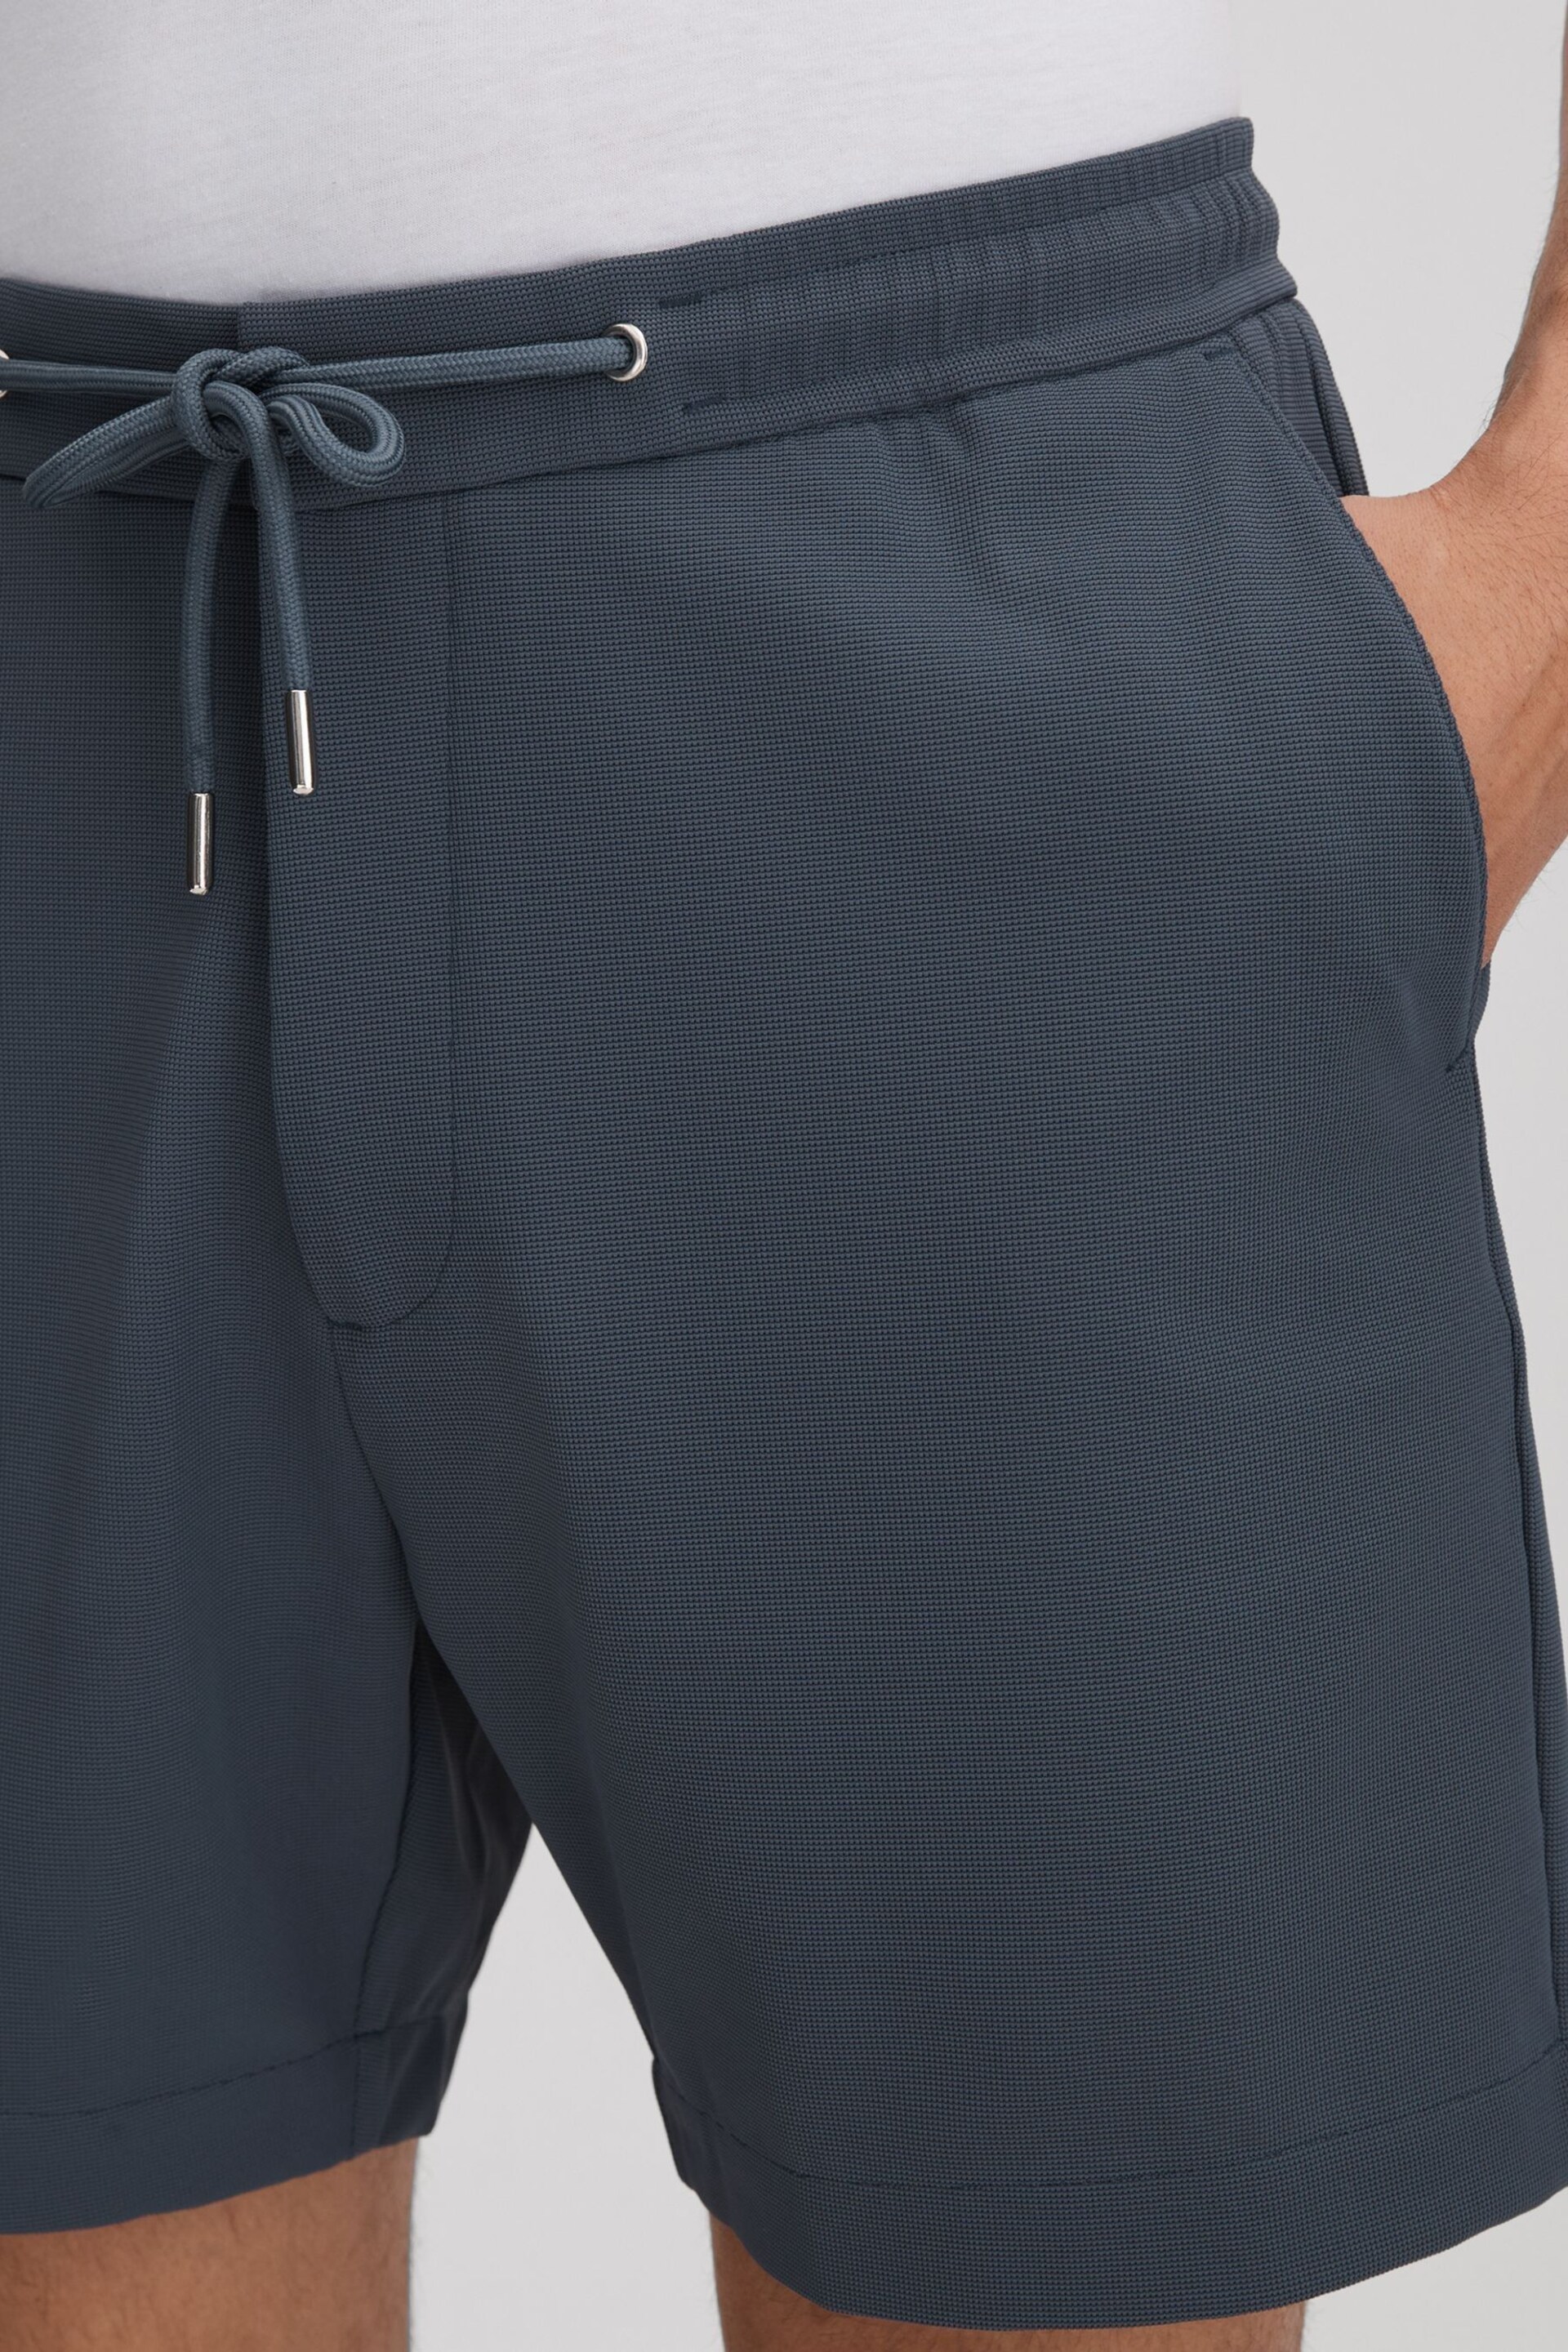 Reiss Airforce Blue Newmark Textured Drawstring Shorts - Image 4 of 6